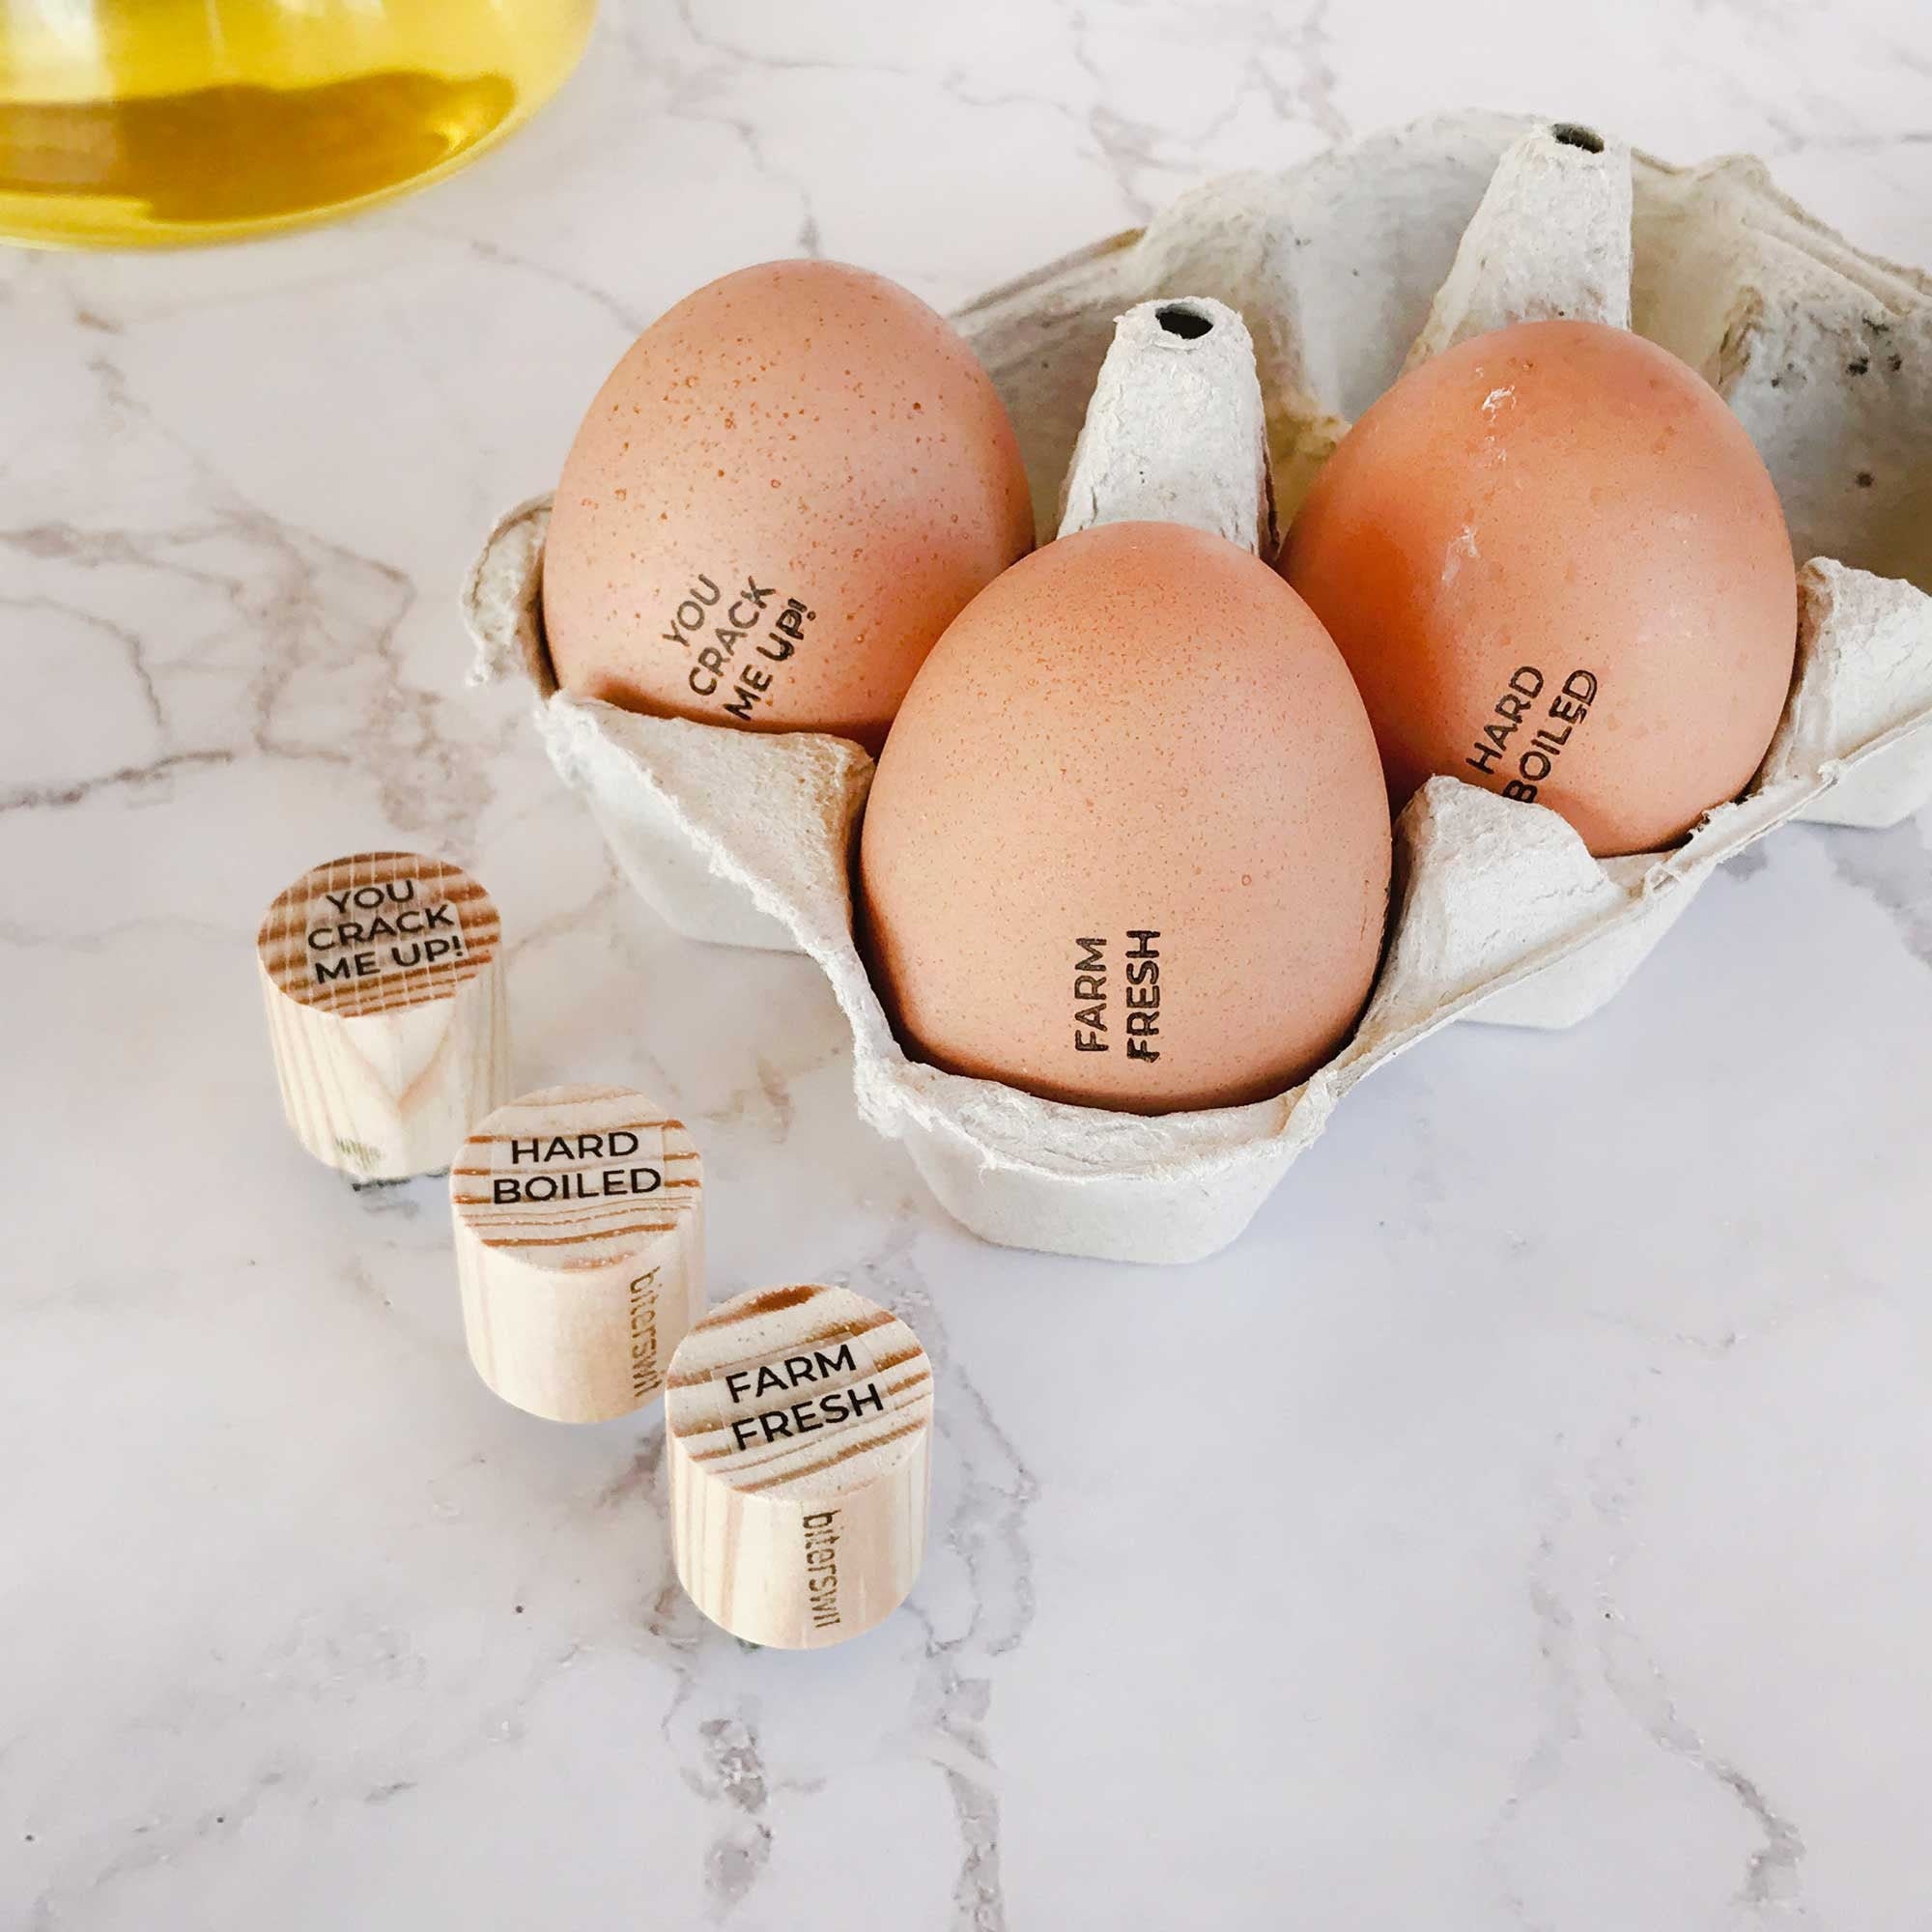 Egg Stamp, Wooden, Egg Stamps for Fresh Eggs, Create Unique Eggs with 4 Pcs  Personalized Egg Stamps Set with Ink Pad, Egg Stamper, 4 Unique Designs